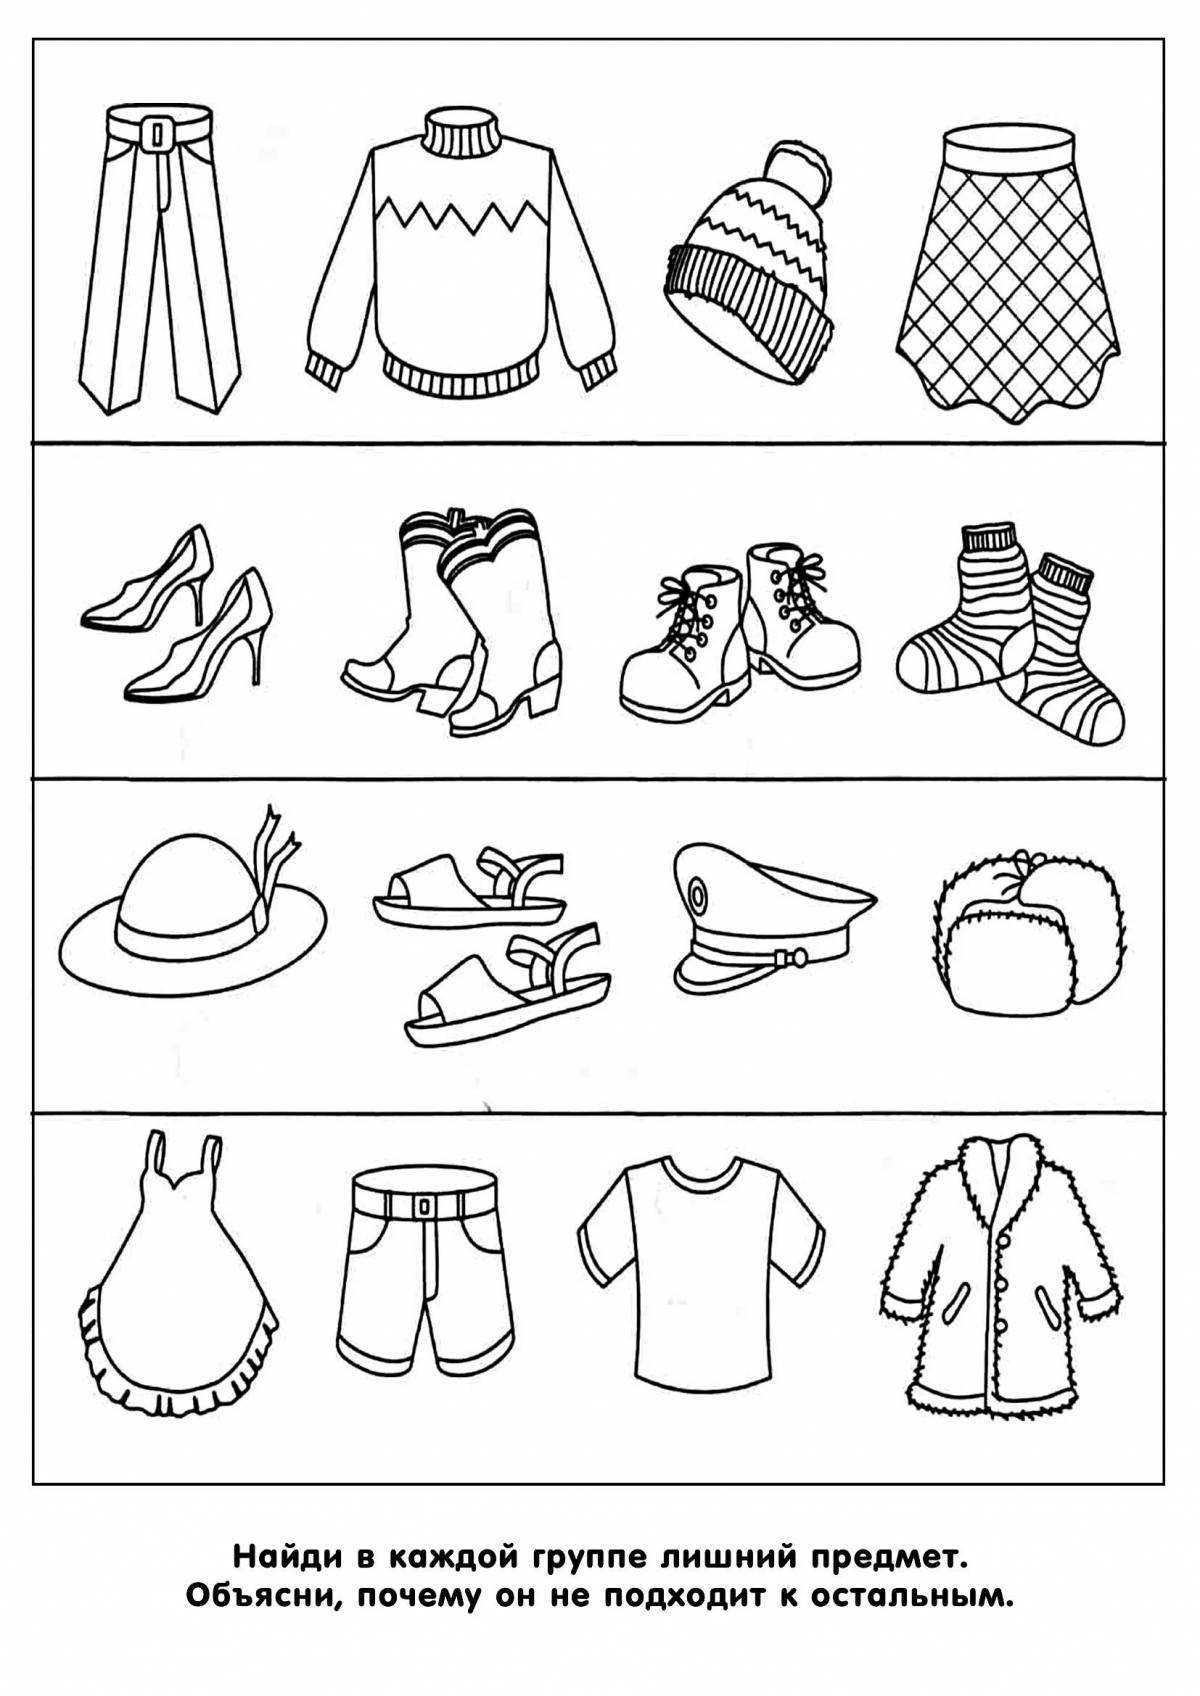 Exciting clothing coloring book for 4-5 year olds